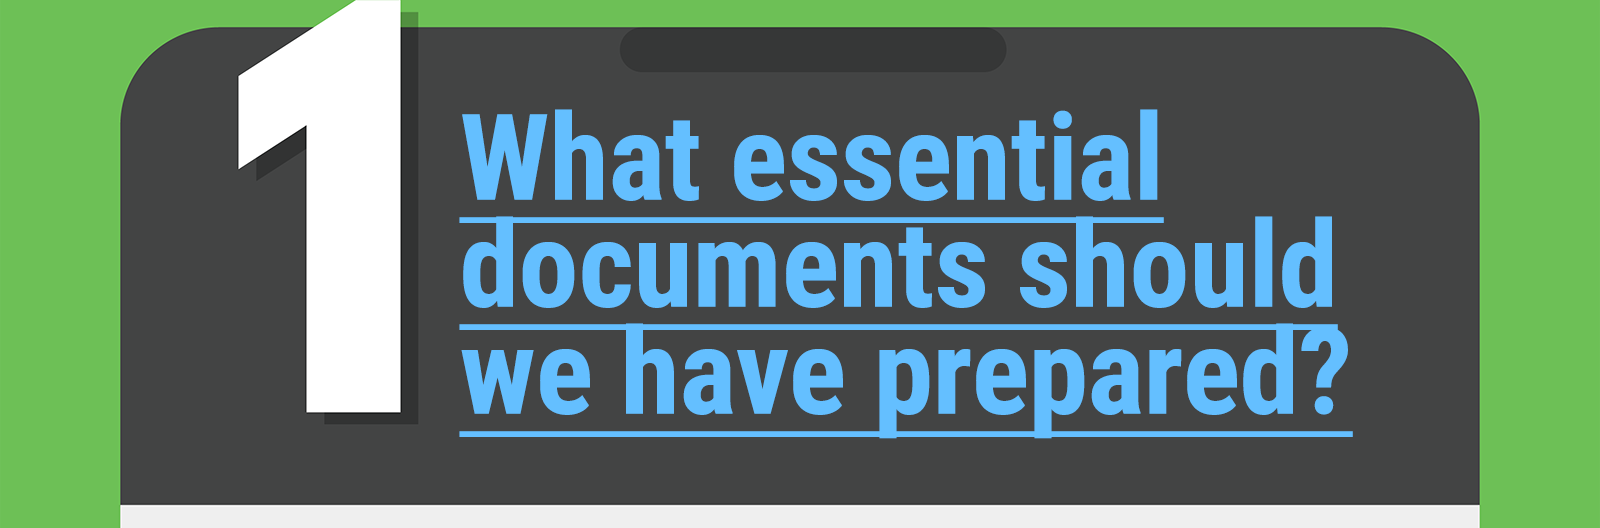 What essential documents should we have prepared?